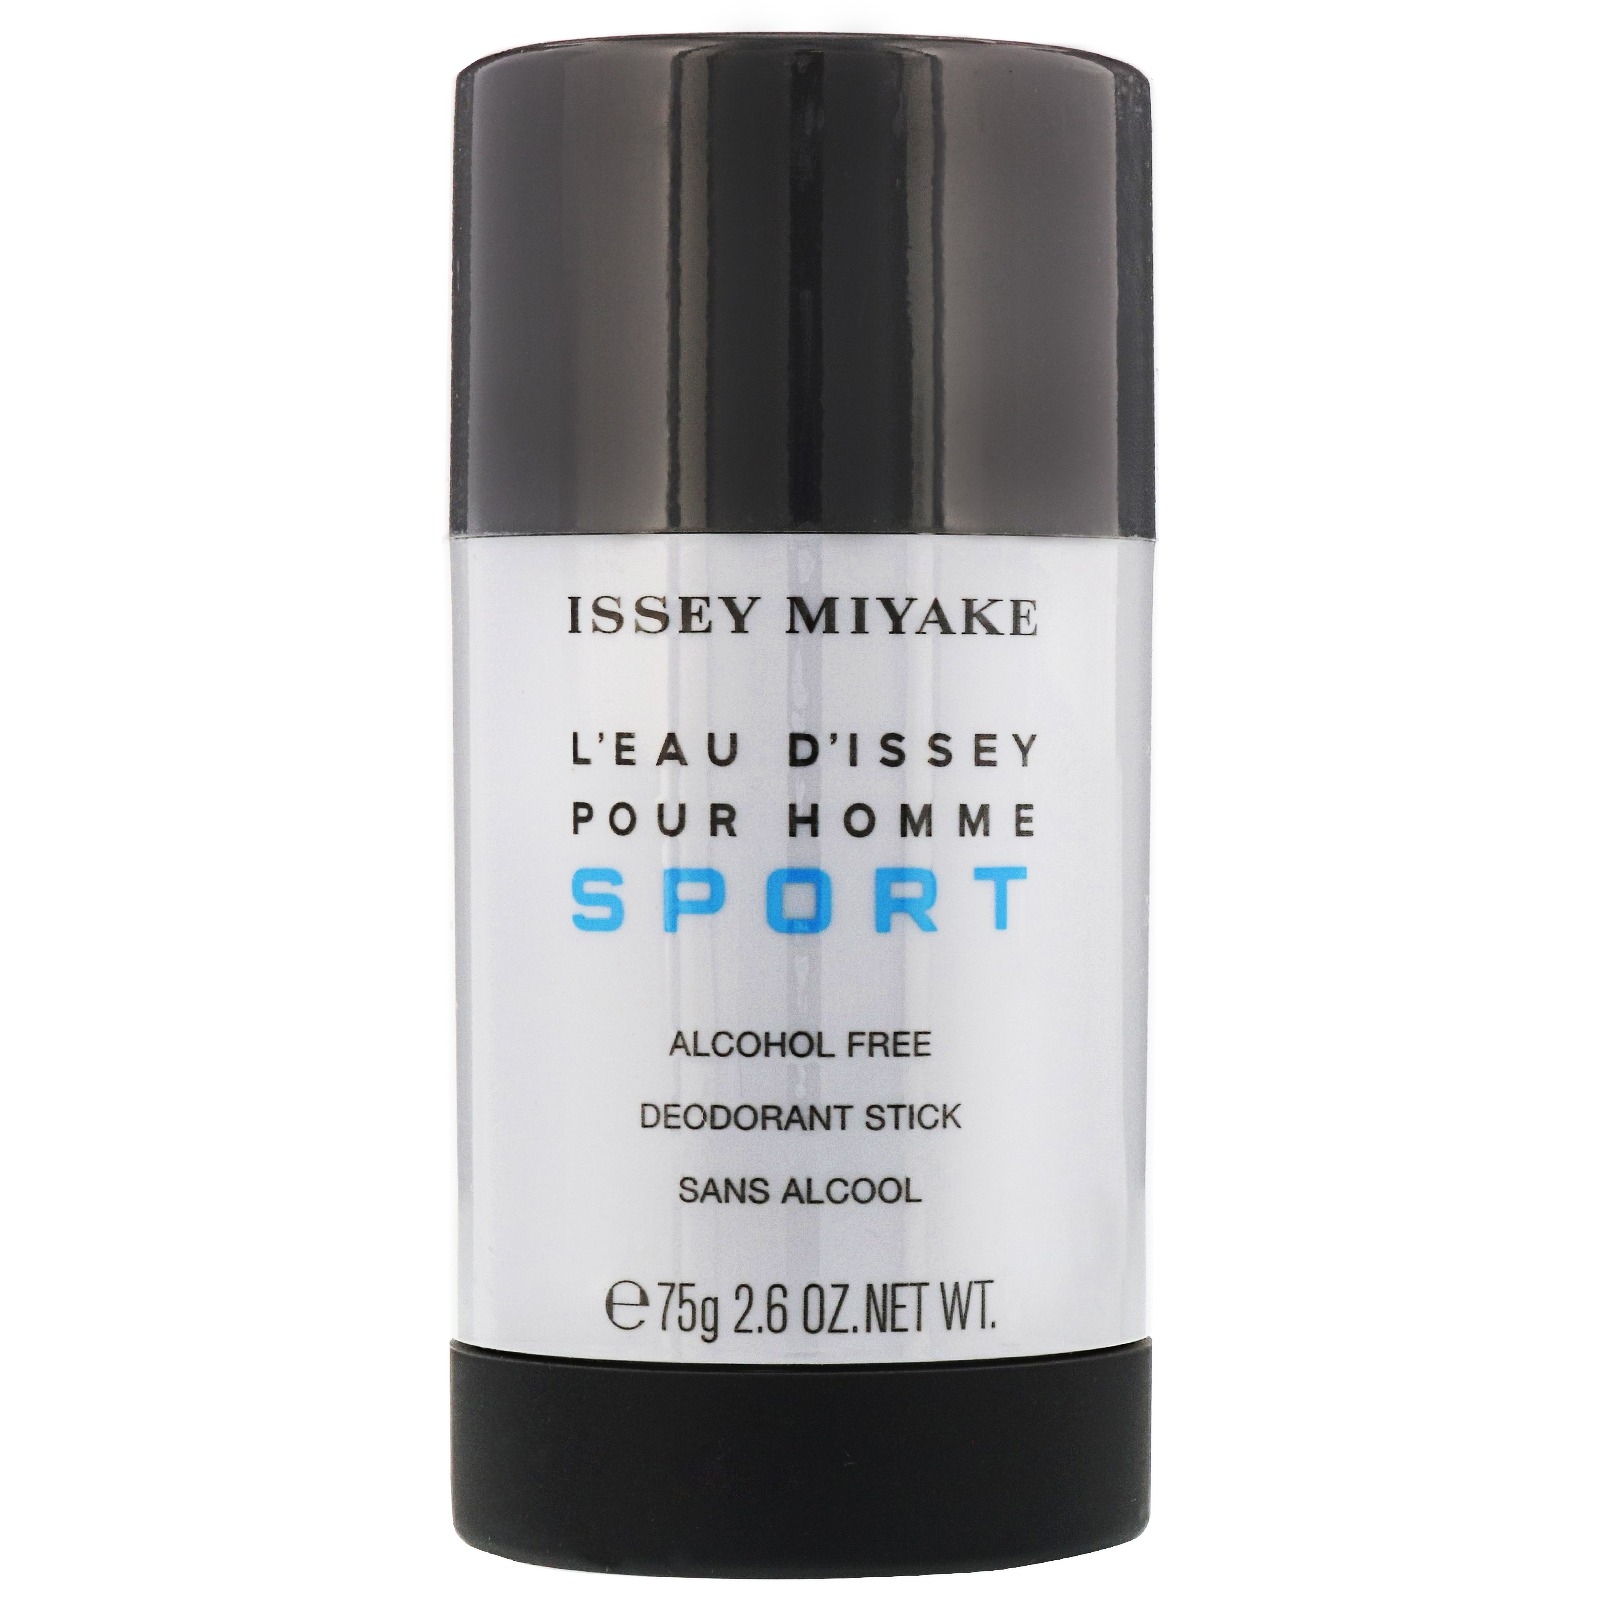 Issey Miyake L'Eau D'Issey Pour Homme Sport Deodorant Stick 75g ...